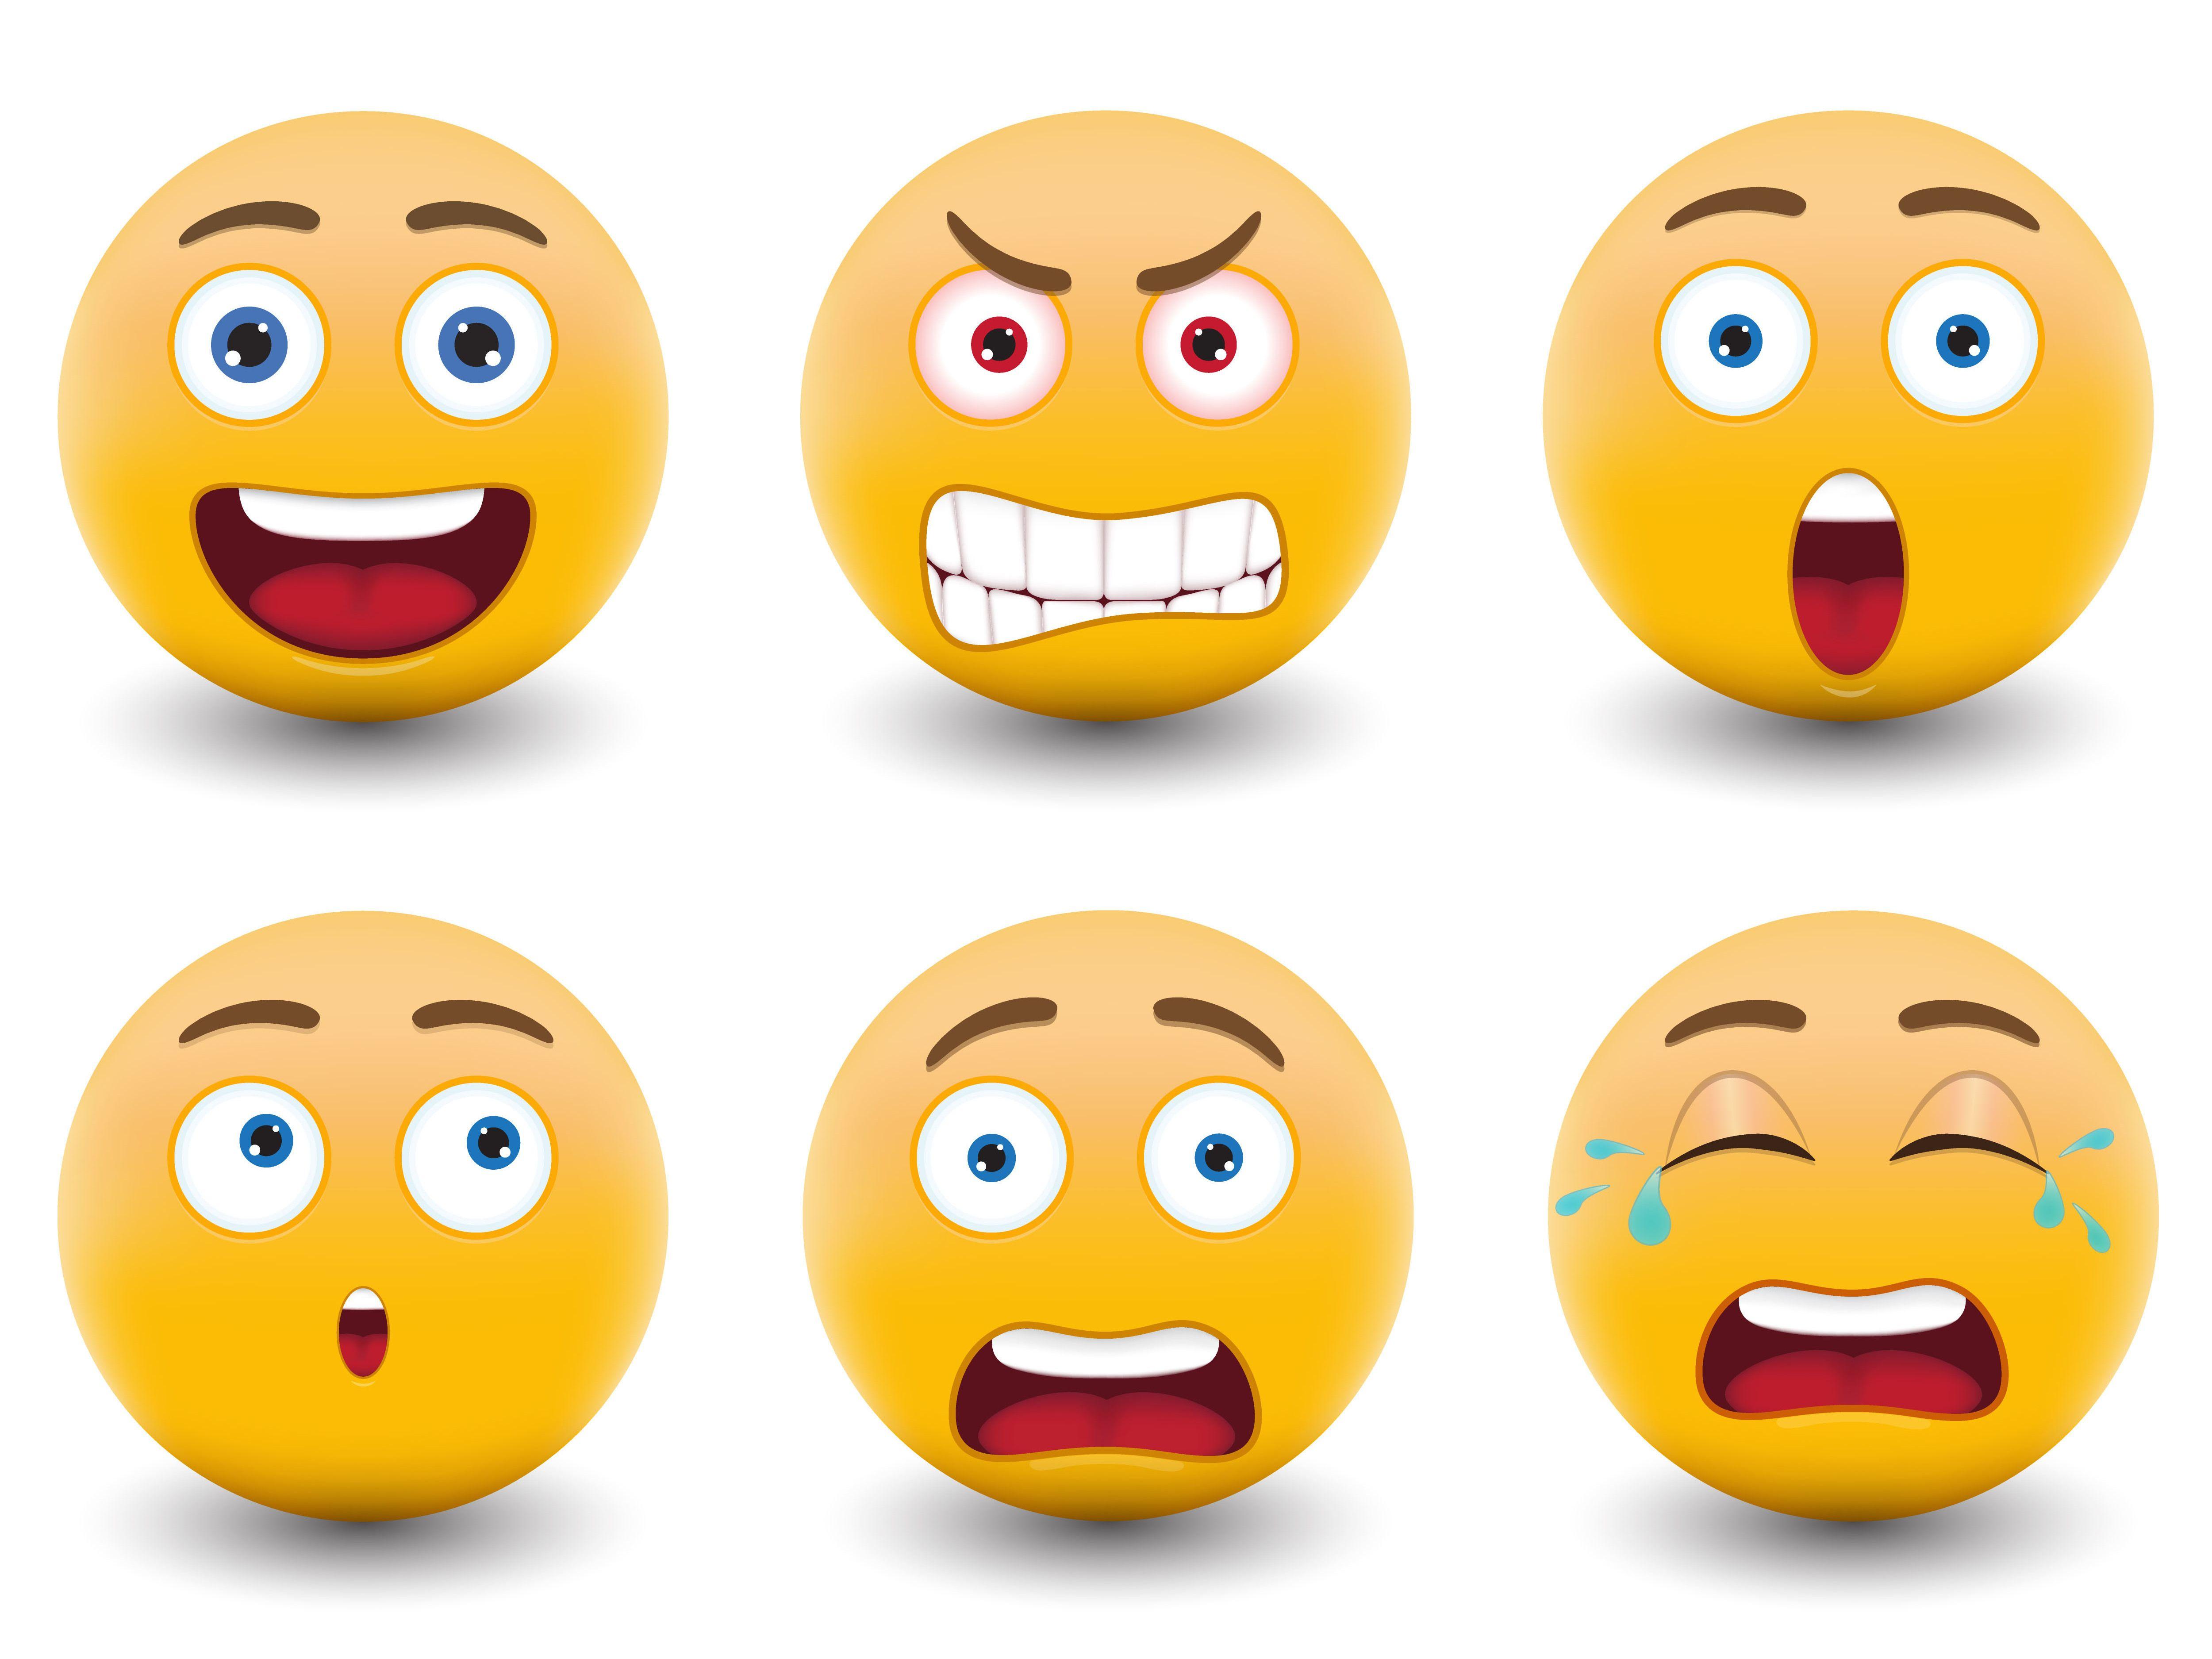 Other Wallpaper: Happy Face Emoji Wallpaper High Quality